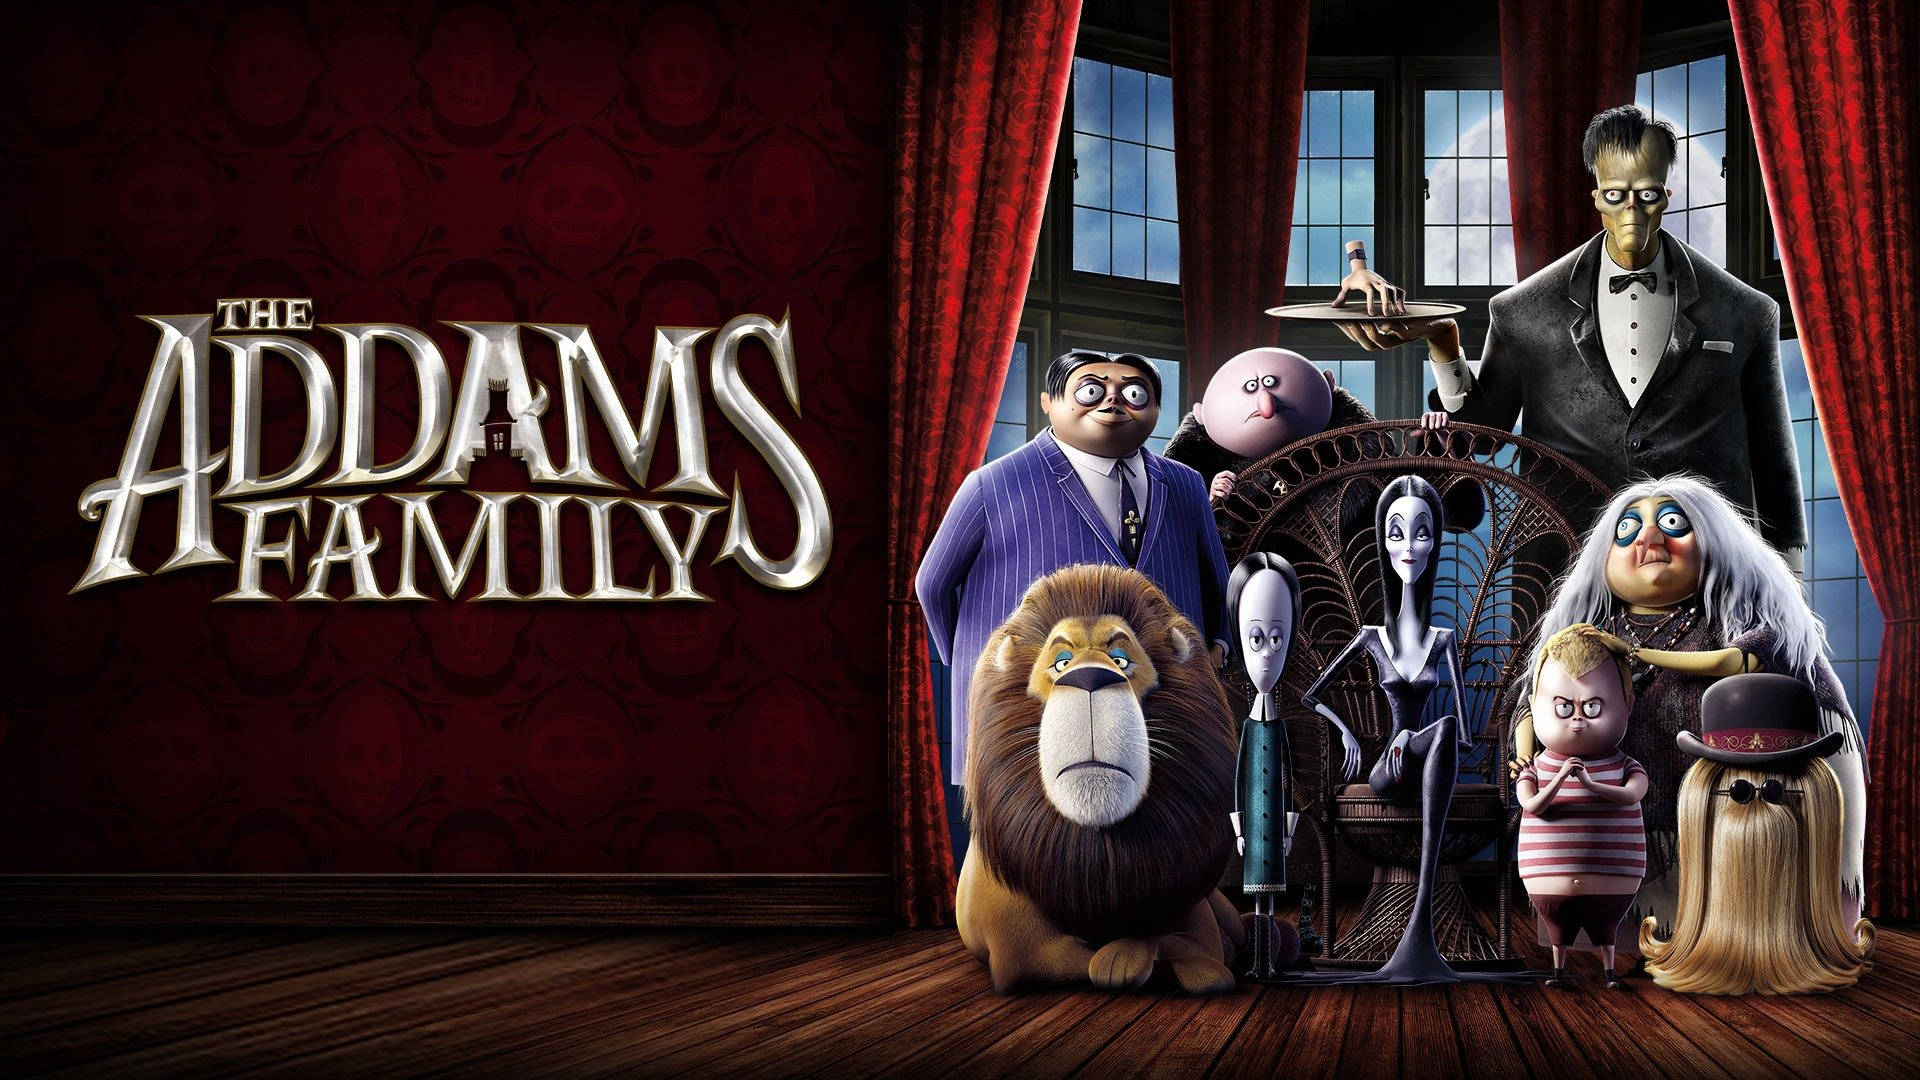 The Addams Family Film Poster Background